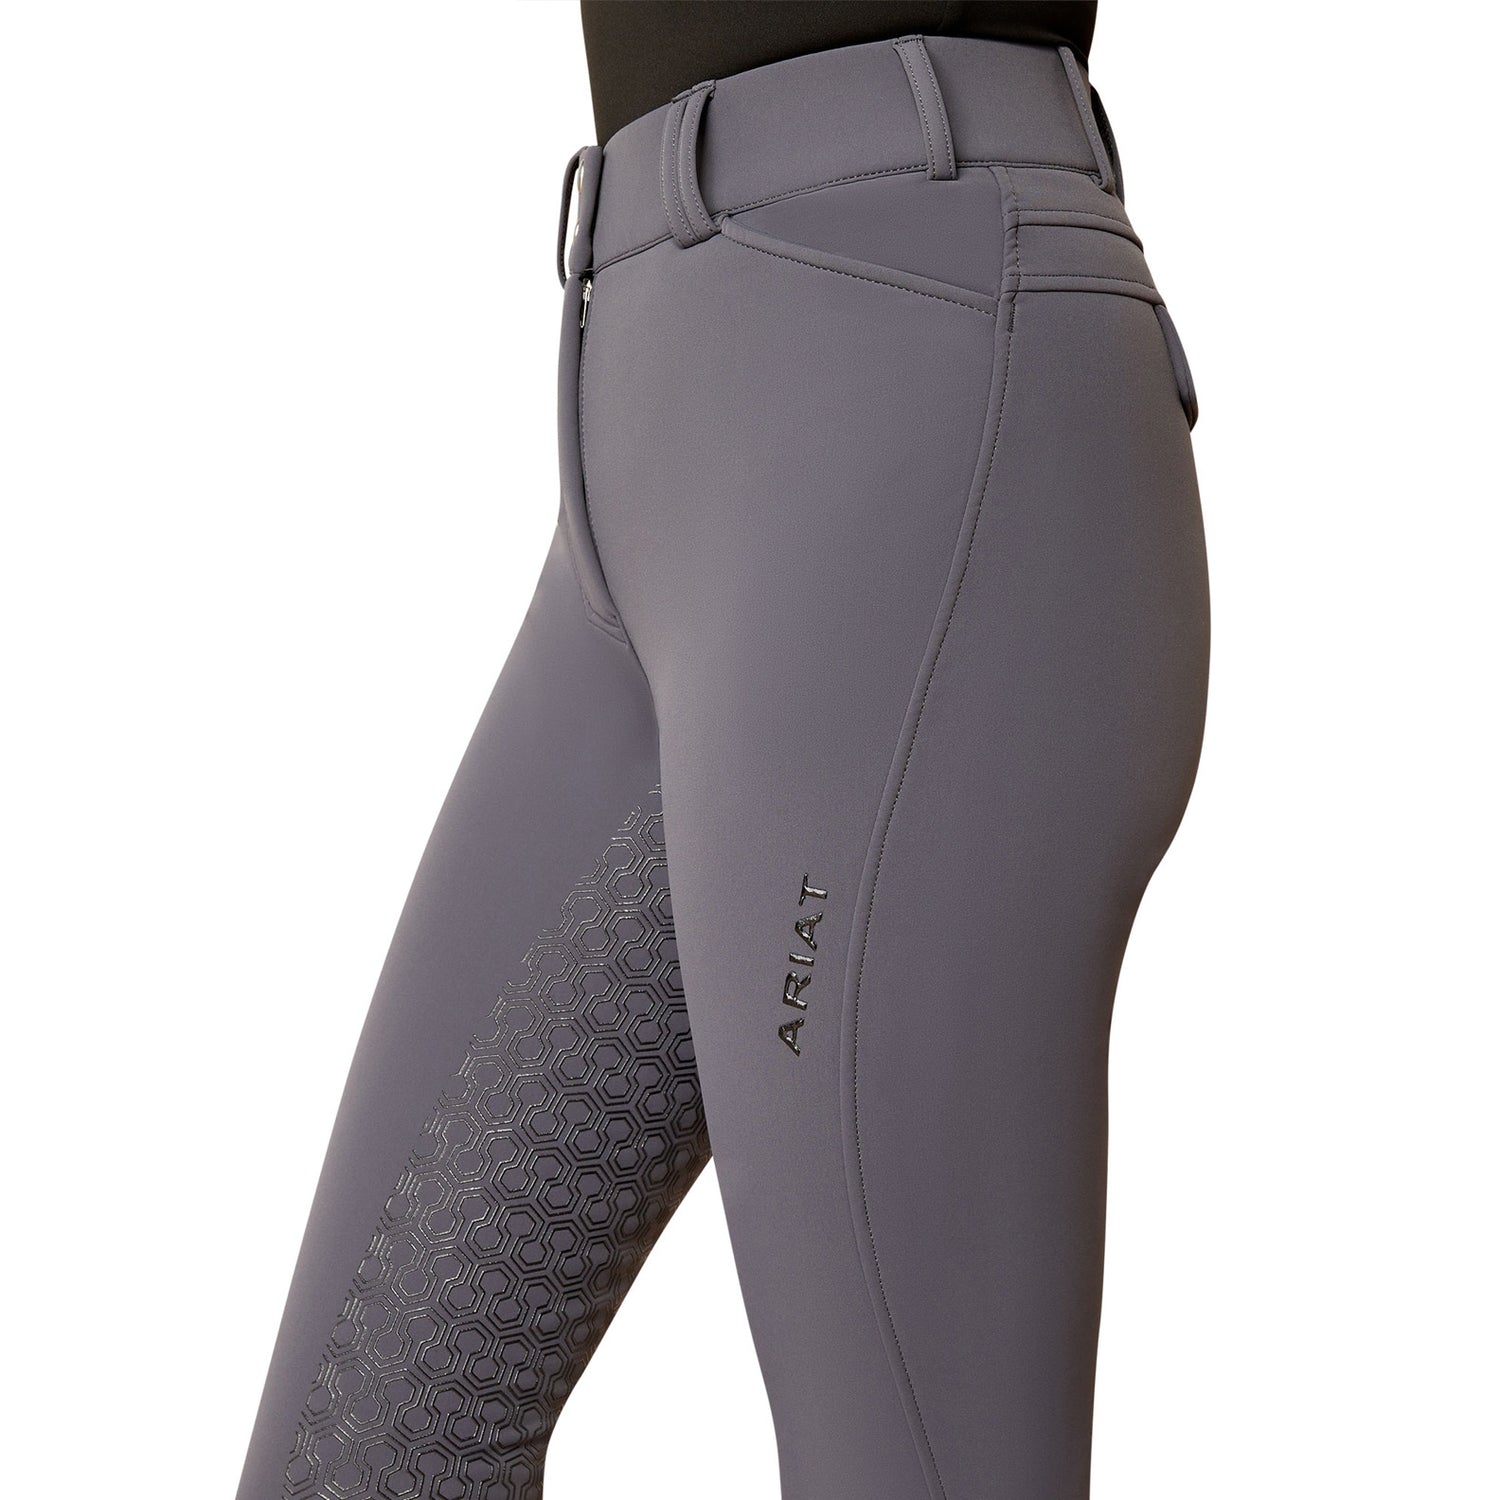 Ariat Womens Tri Factor Frost Insulated Full Seat Breeches